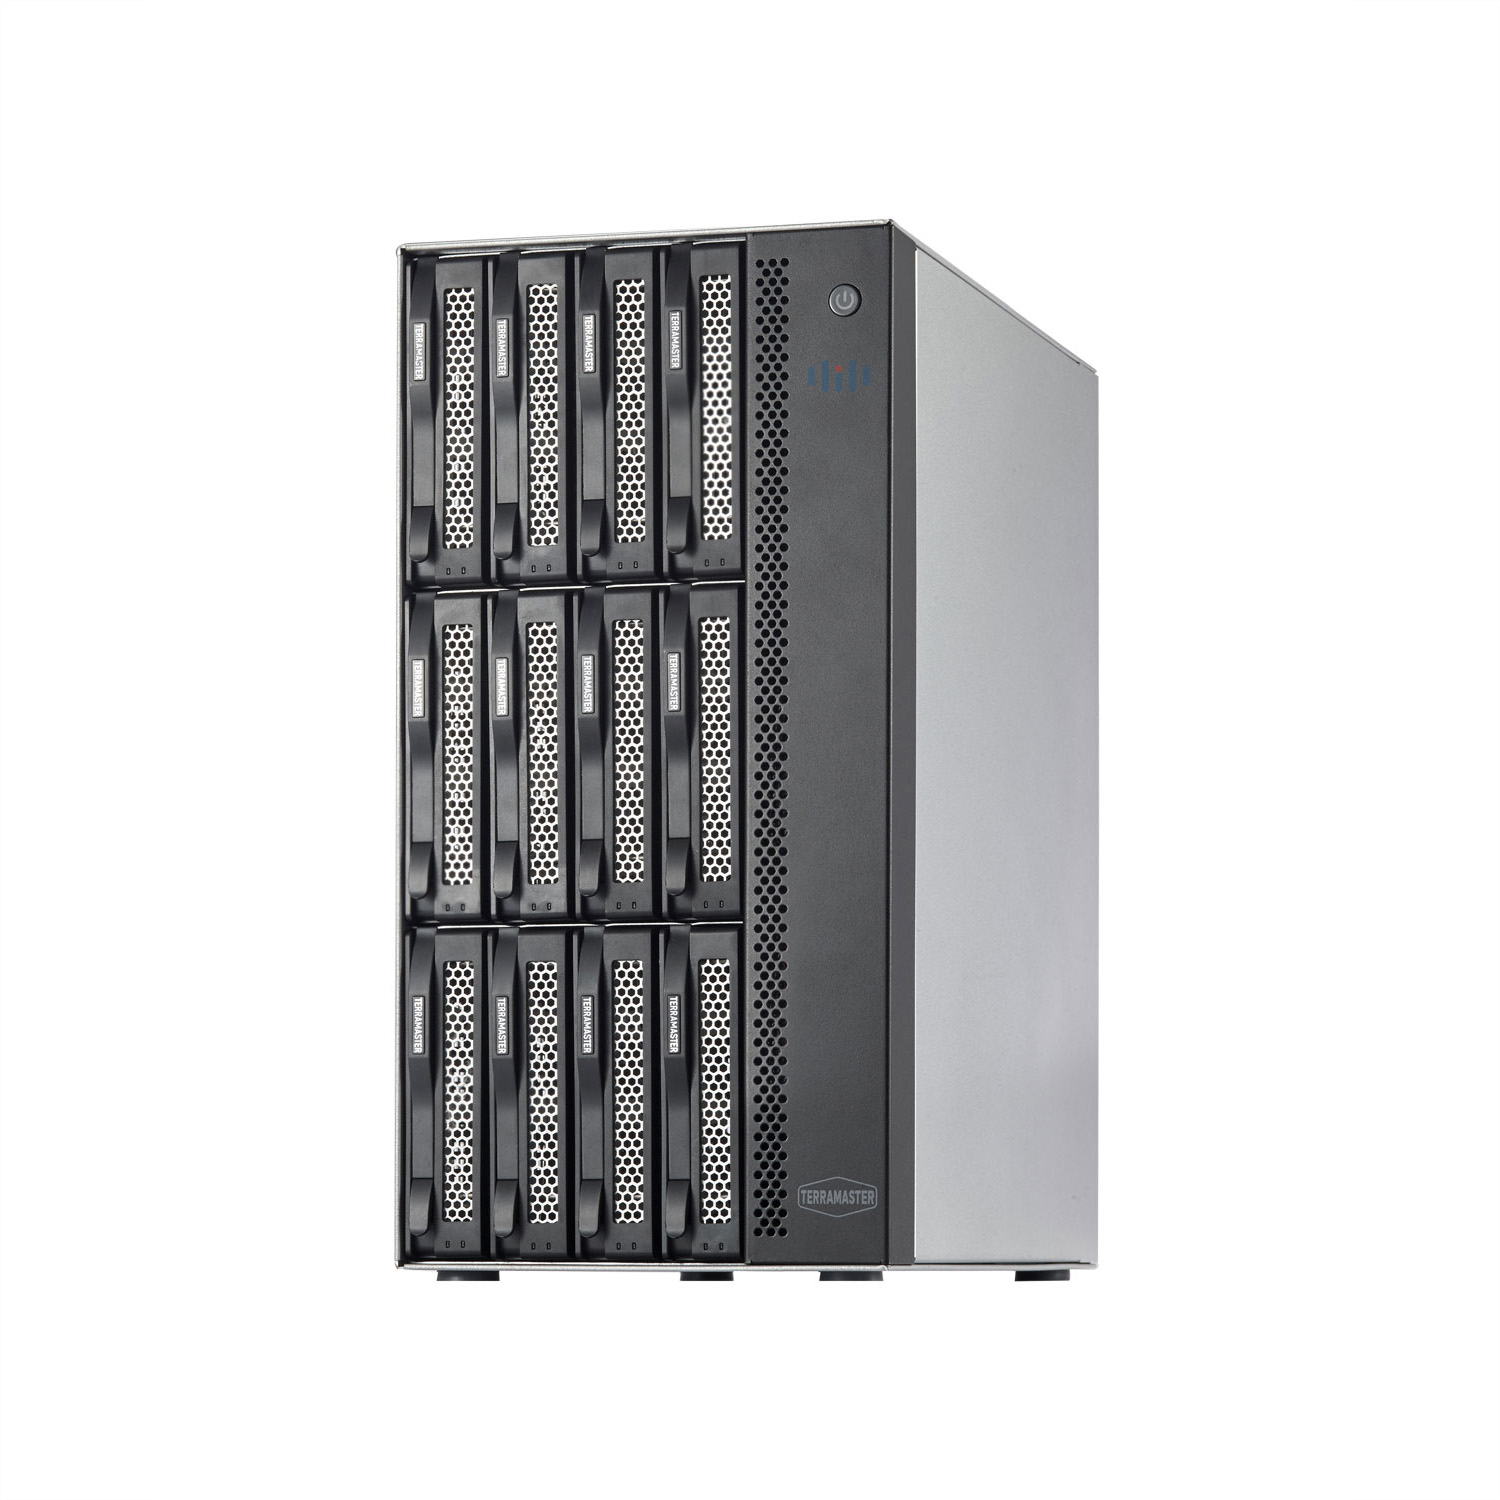 TerraMaster T12-450 all in one 12Bay Tower NAS